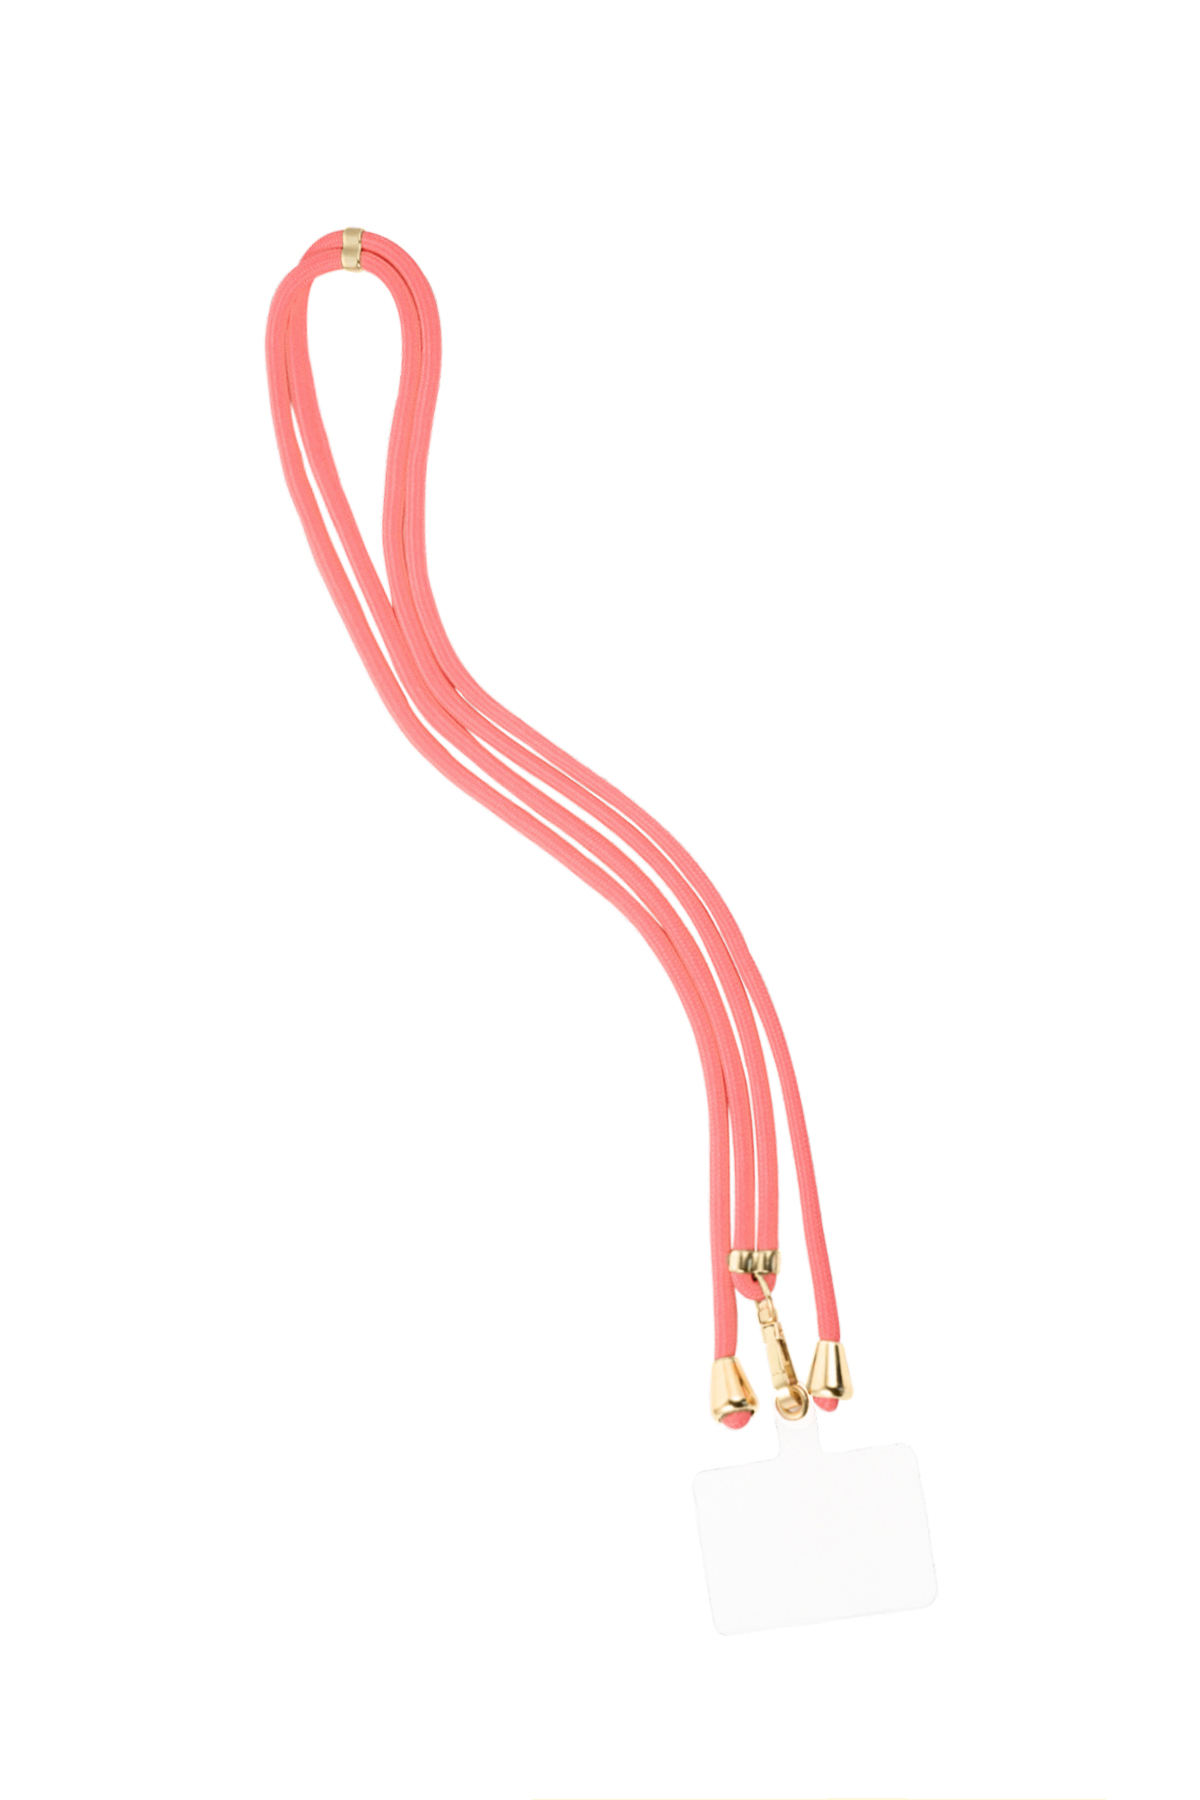 Telephone cord subtle print - baby pink